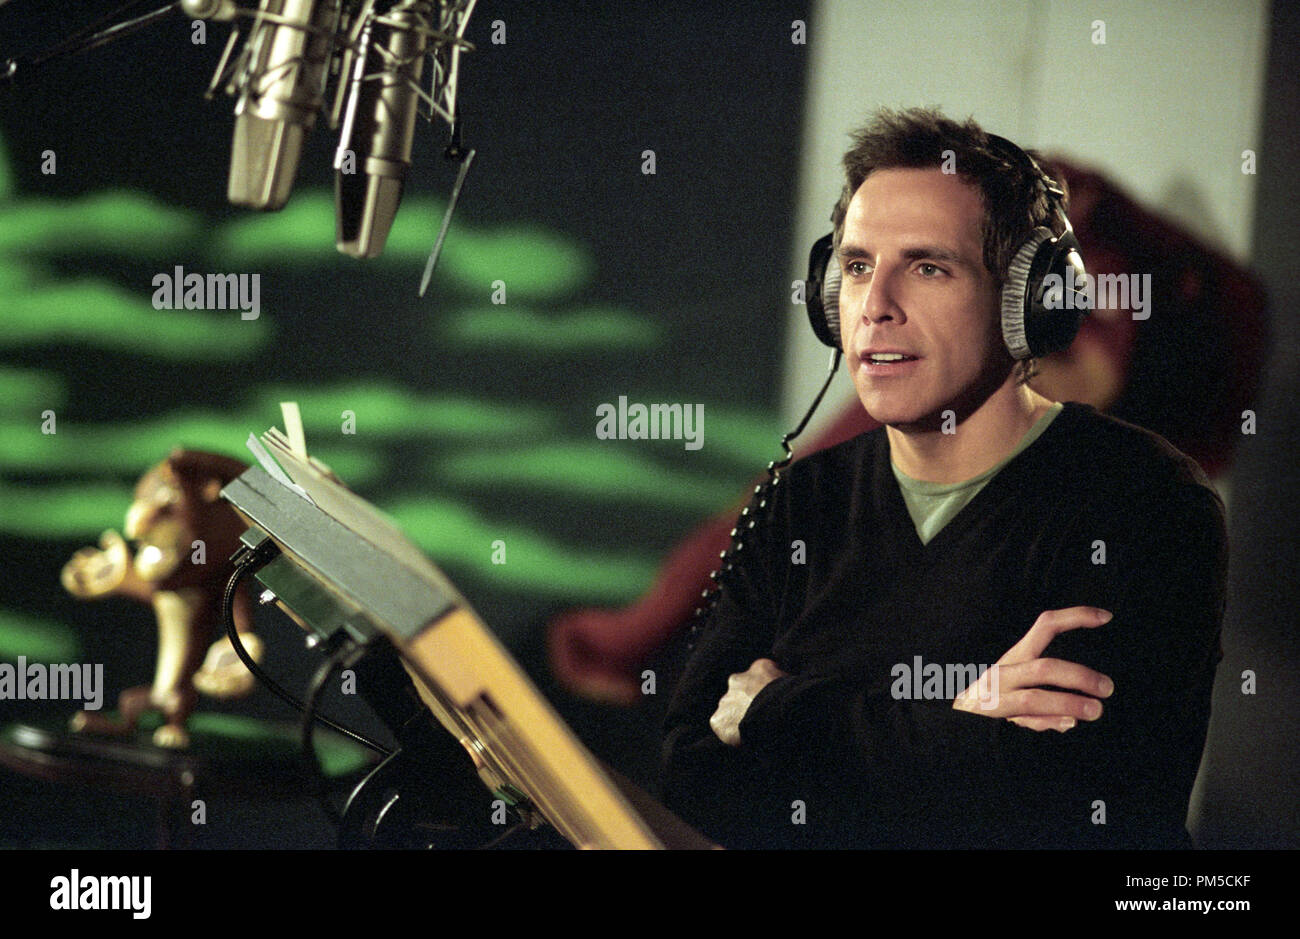 Film Still / Publicity Still from 'Madagascar'  Ben Stiller © 2005 Dream Works  Photo courtesy Dream Works Animation SKG    File Reference # 307361122THA  For Editorial Use Only -  All Rights Reserved Stock Photo